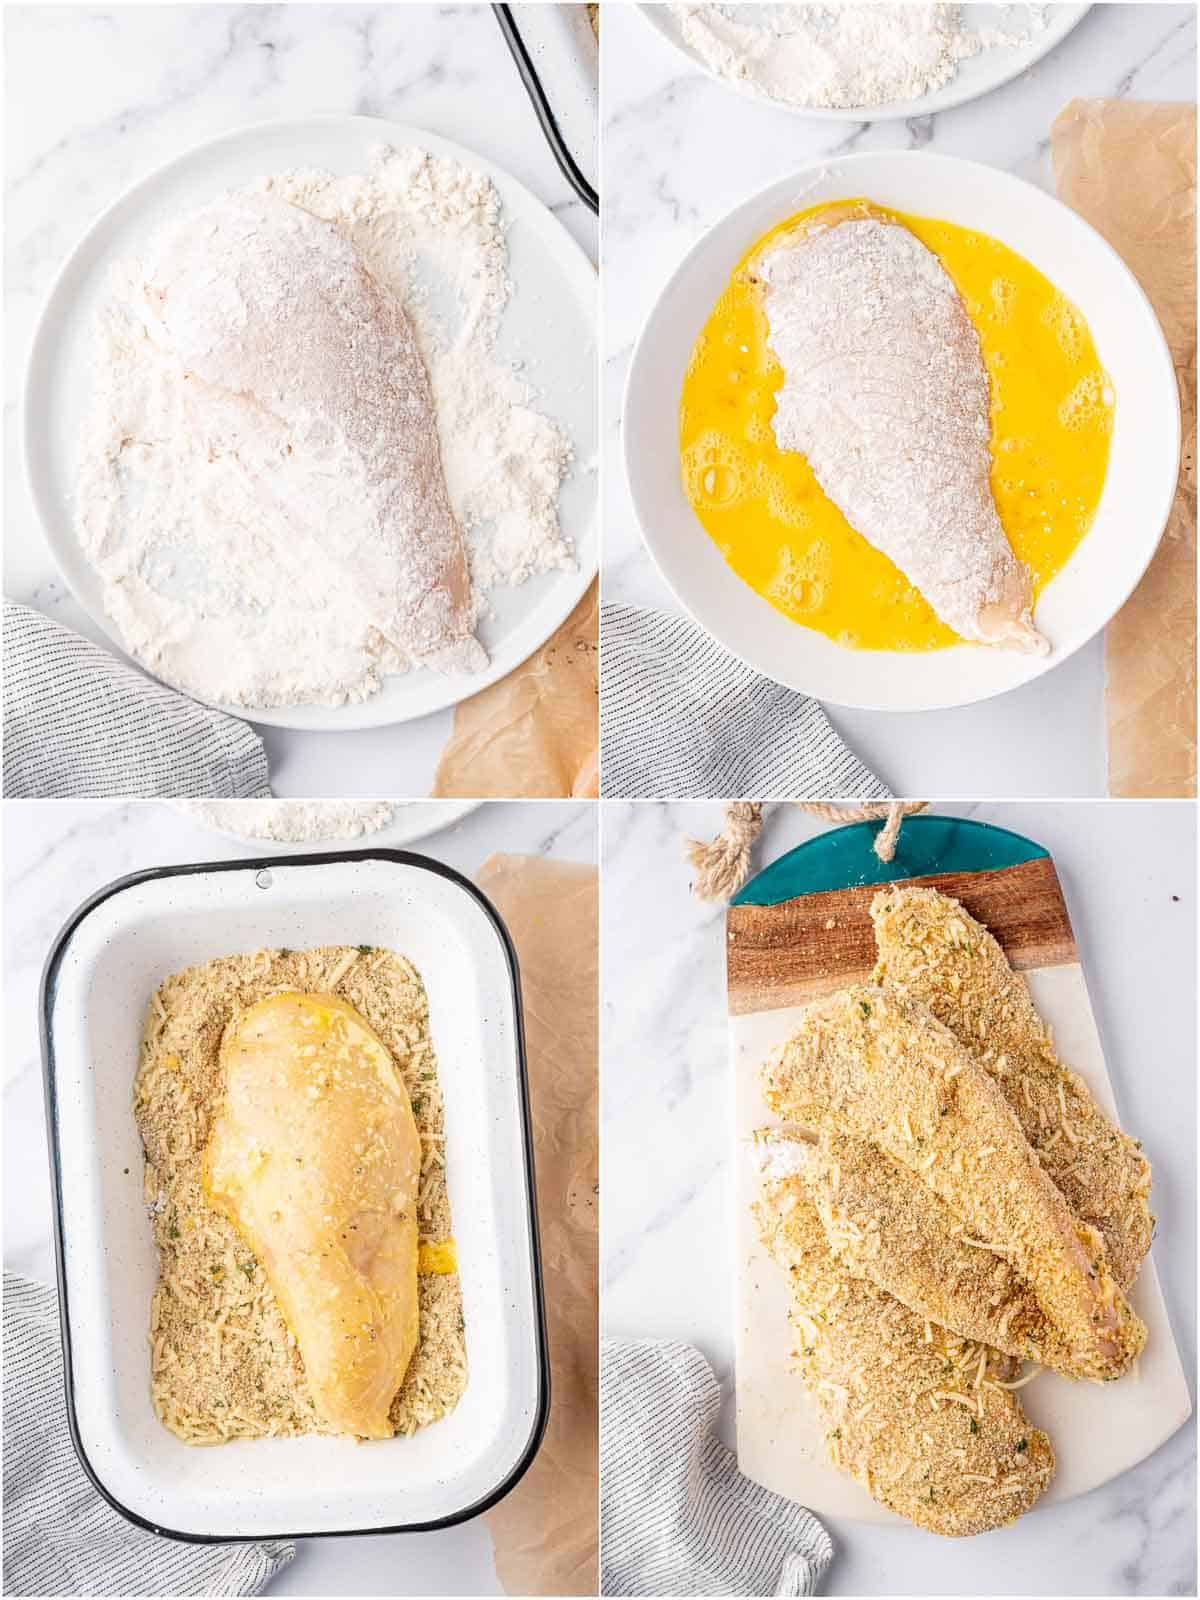 Process of dredging chicken breast in flour then coating in egg and parmesan breadcrumb mixture.